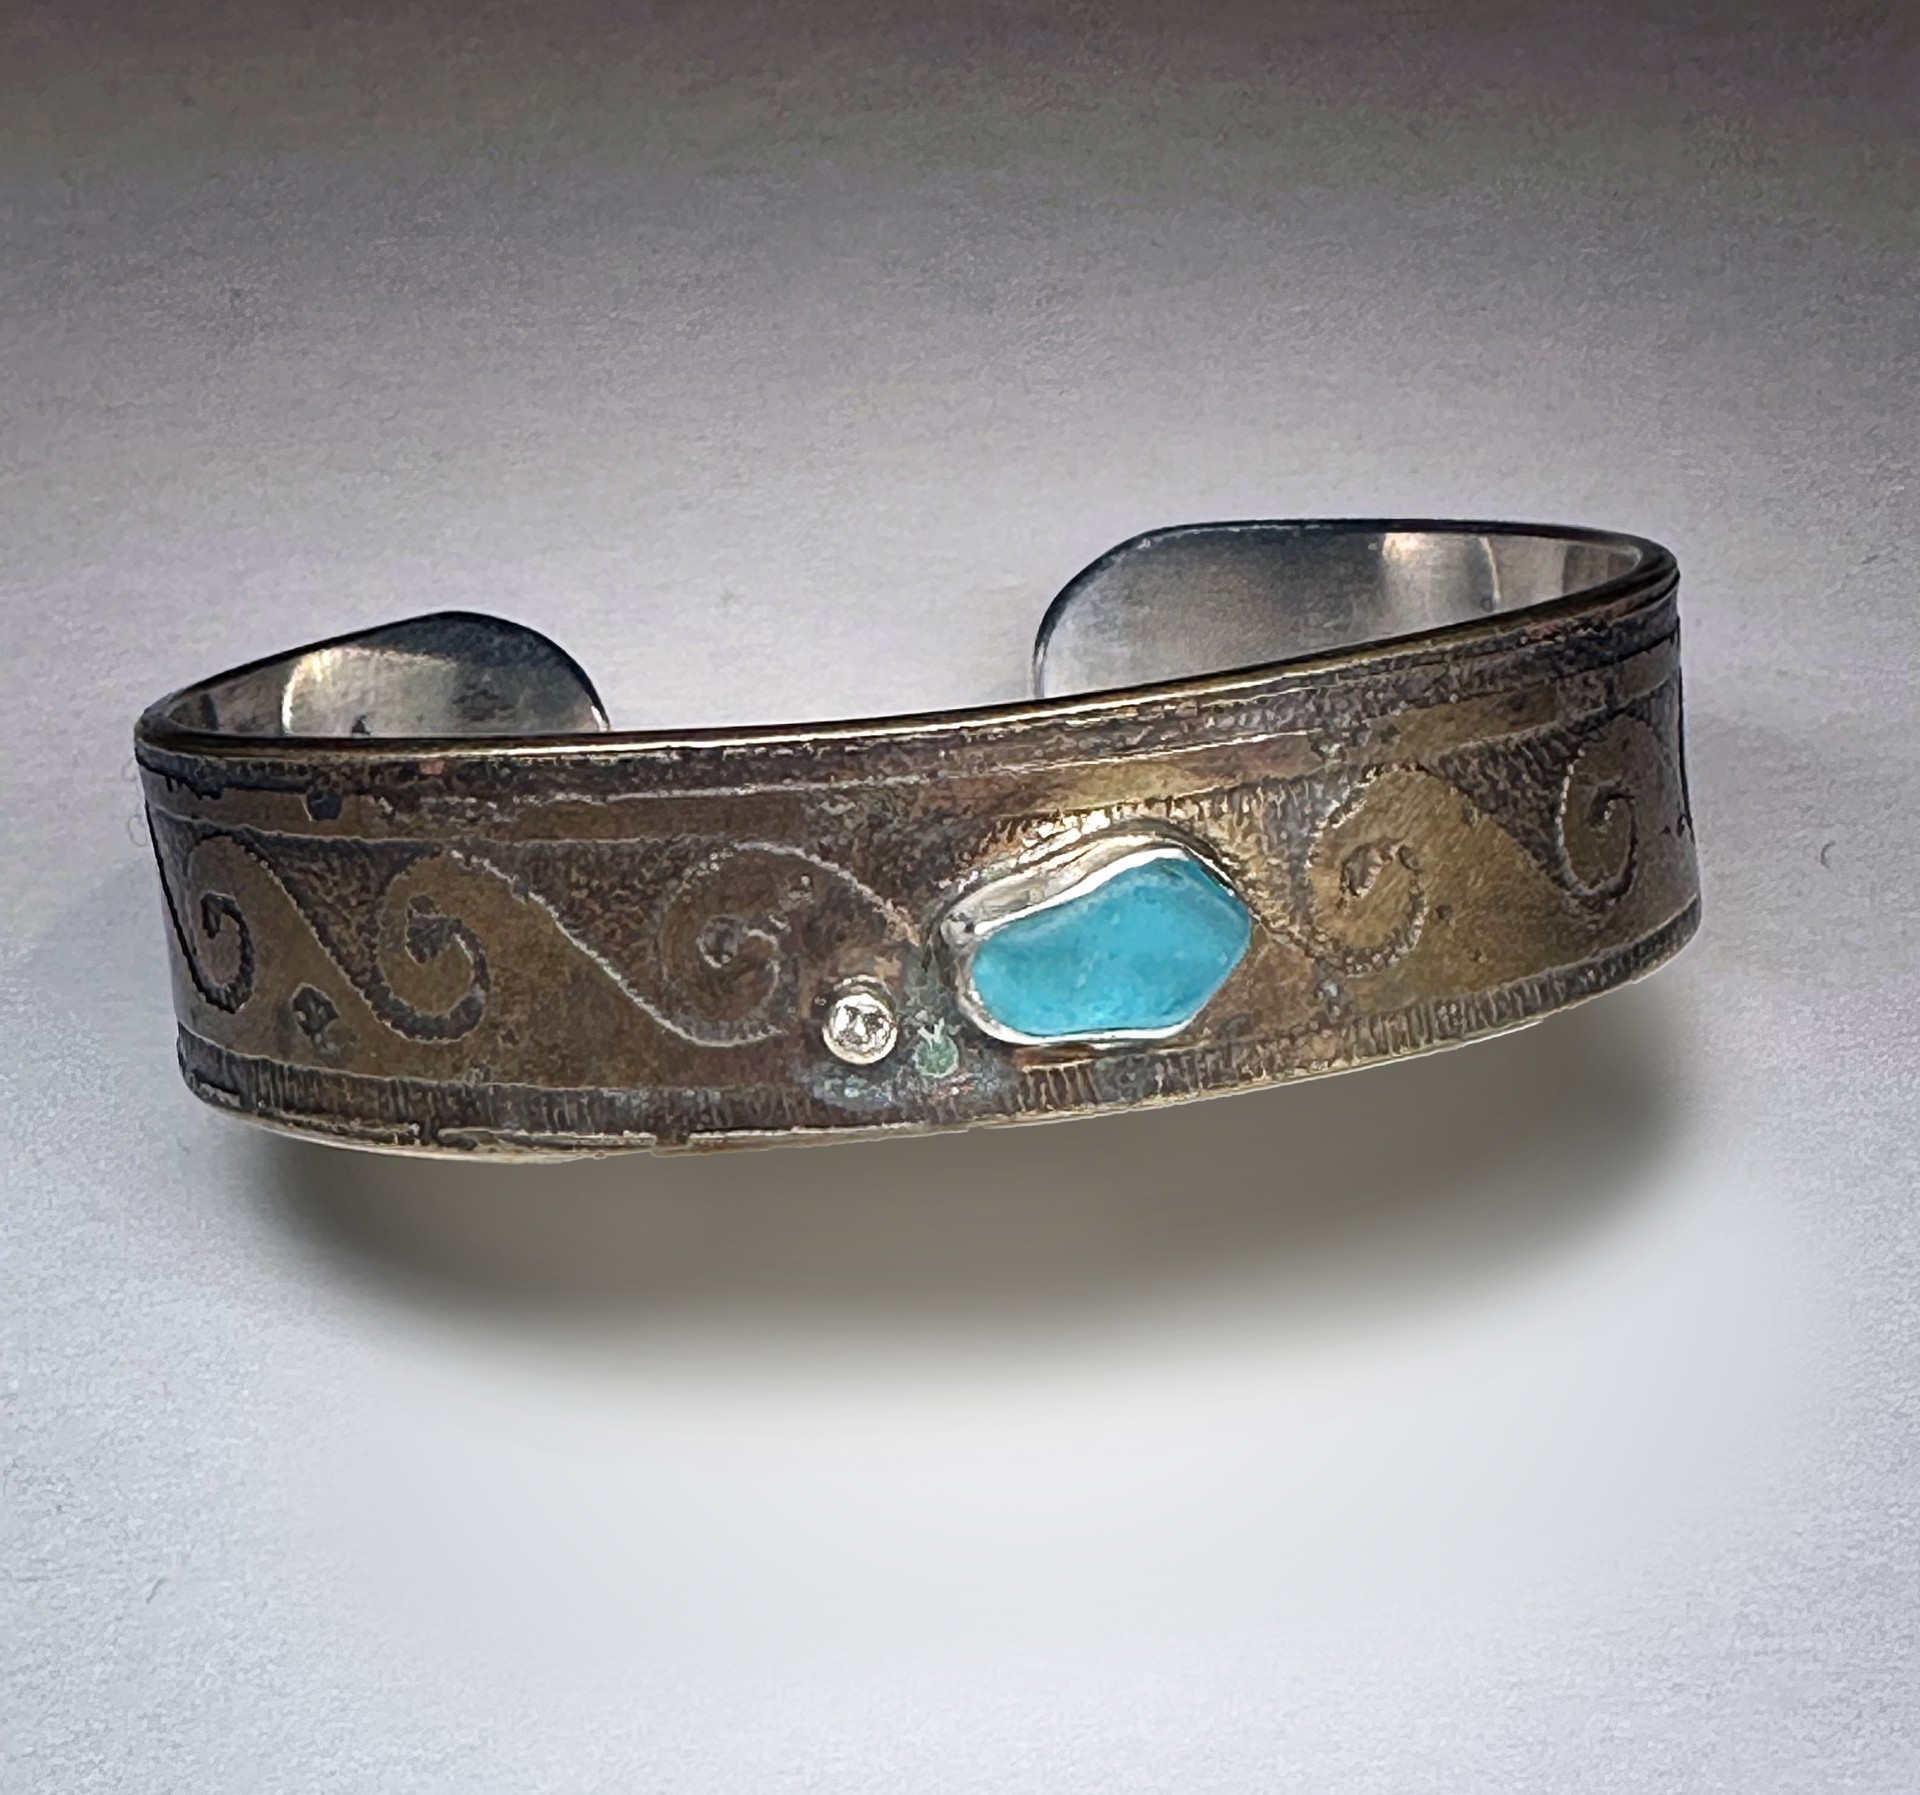 Adriatica Etched Cuff with Teal Sea Glass and Diamond by Judith Altruda